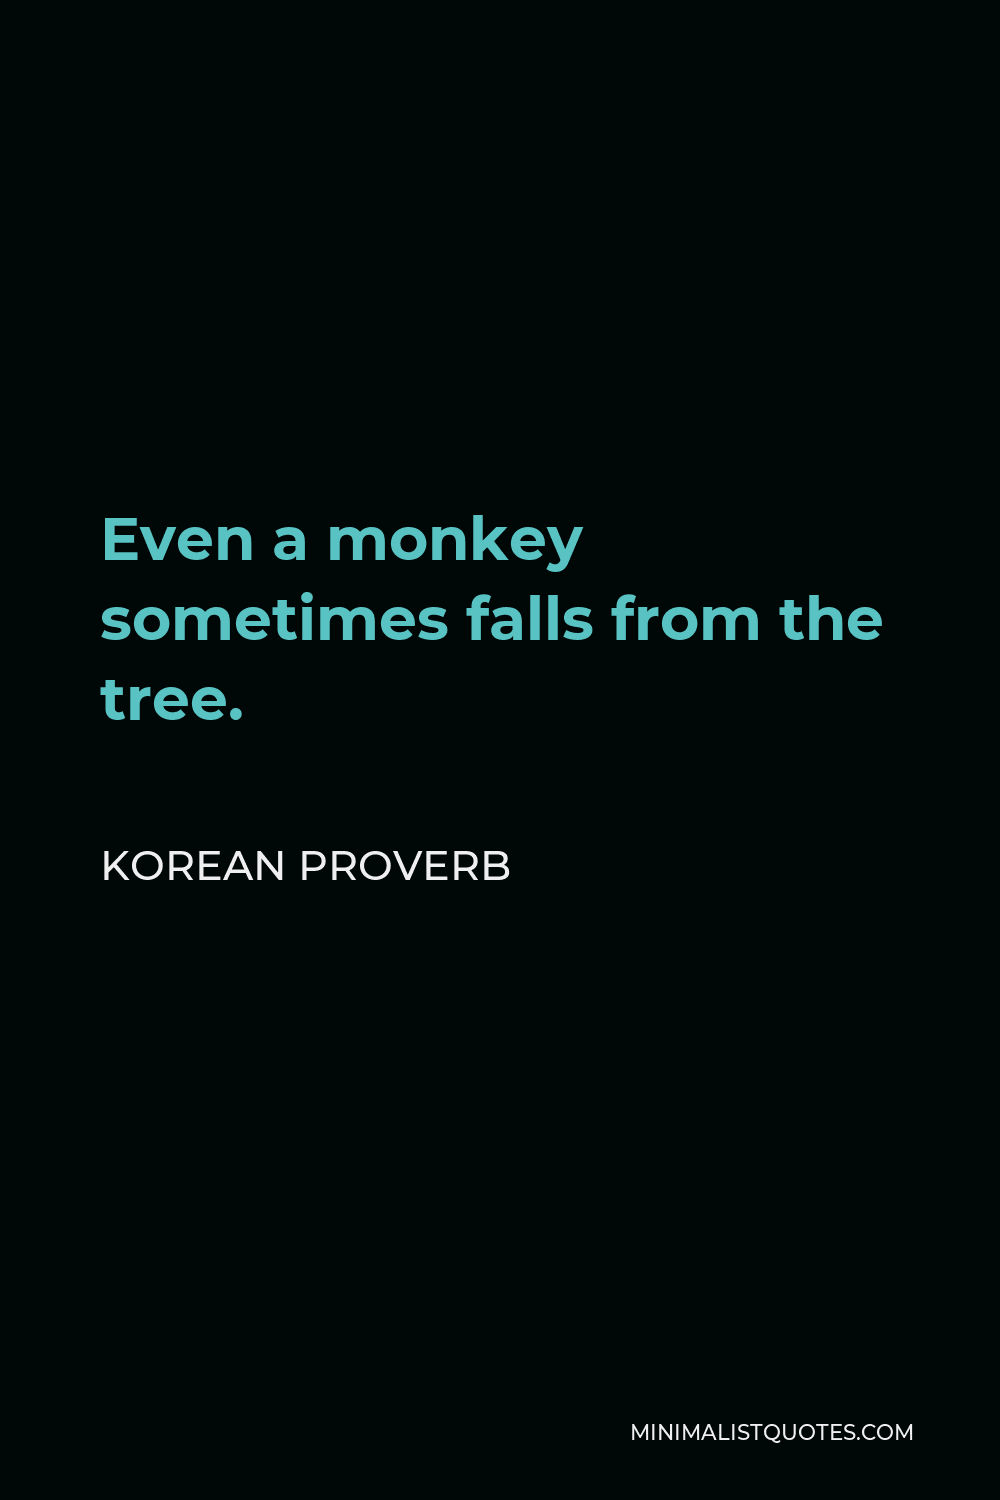 Korean Proverb Quote - Even a monkey sometimes falls from the tree.